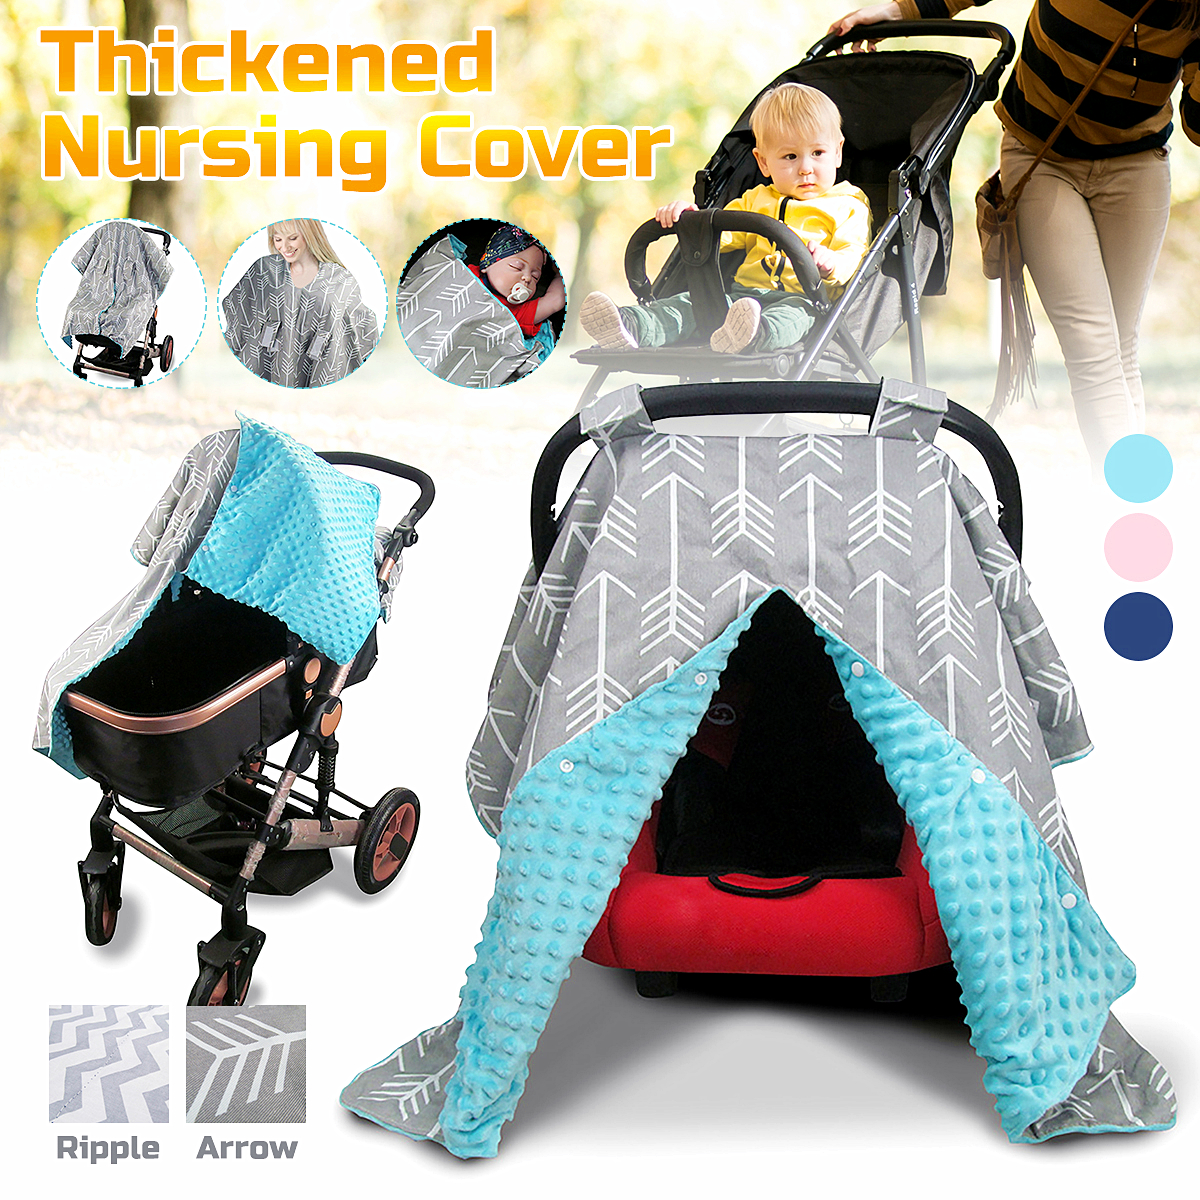 4-IN-1-Thickened-Multi-Use-Stroller-Cart-Seat-Cover-Breastfeeding-Nursing-Scarf-Snug-Warm-Breathable-1810349-1